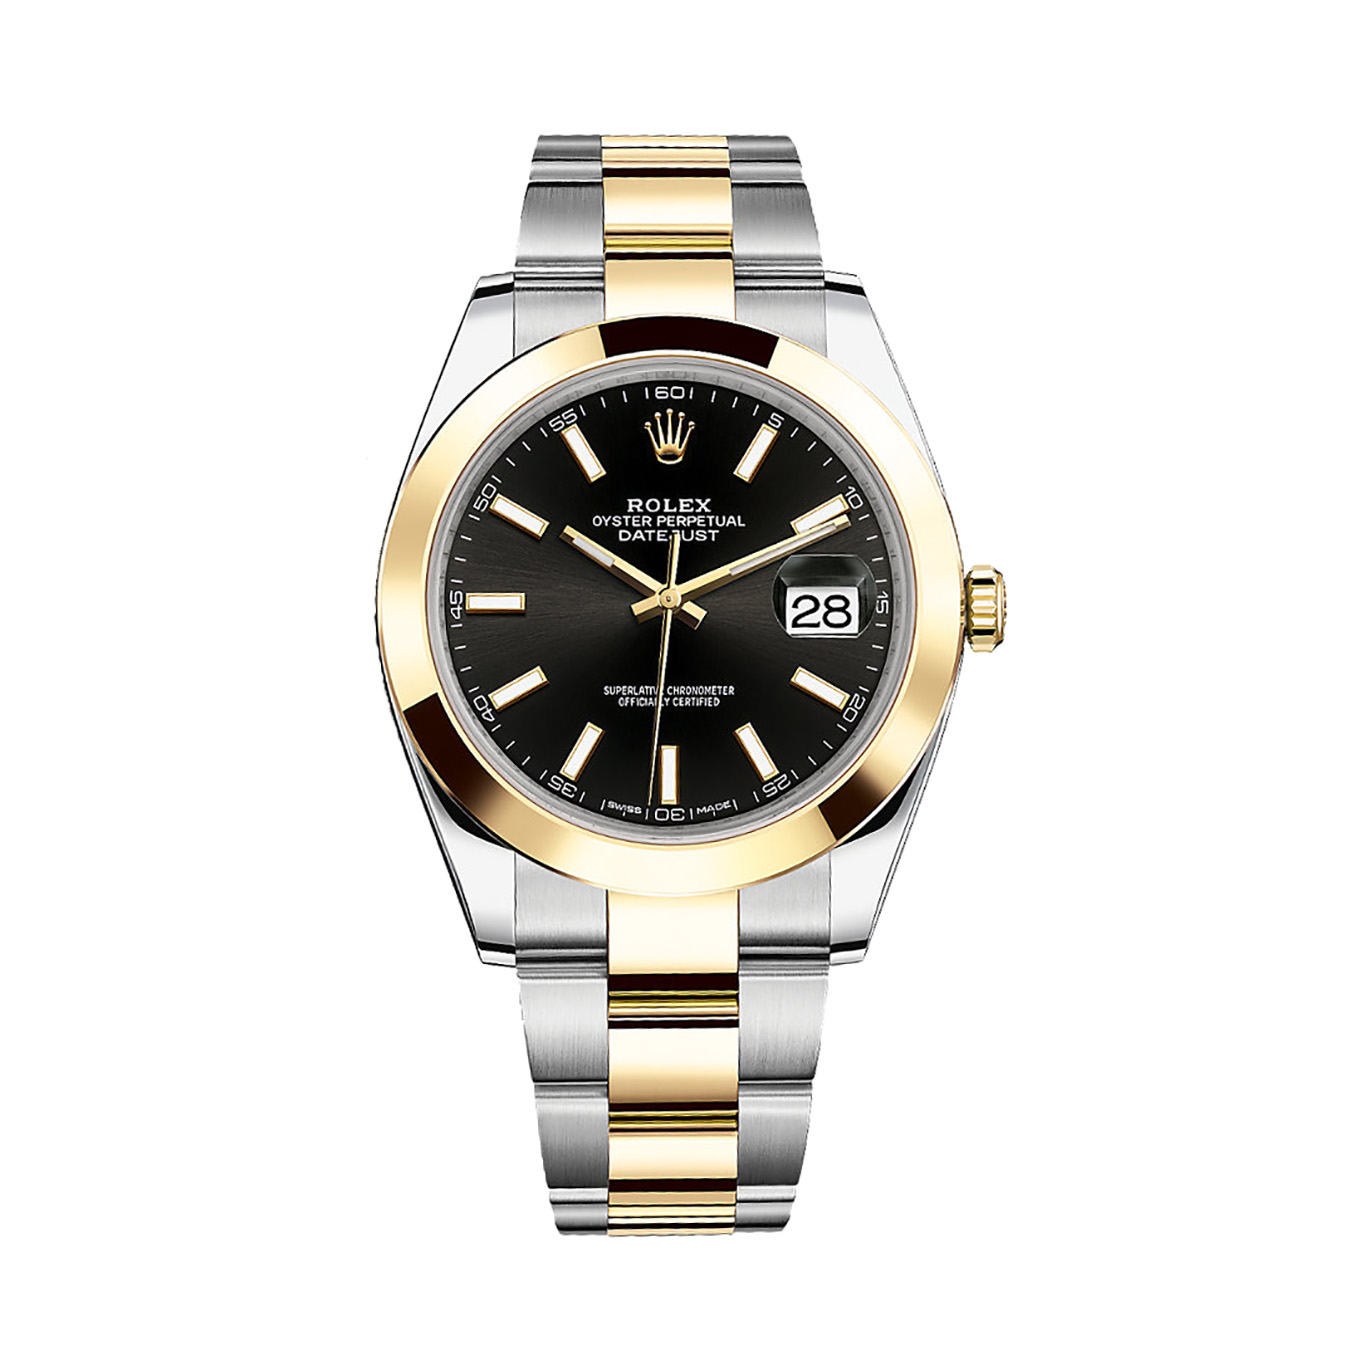 Datejust 41 126303 Gold & Stainless Steel Watch (Black)